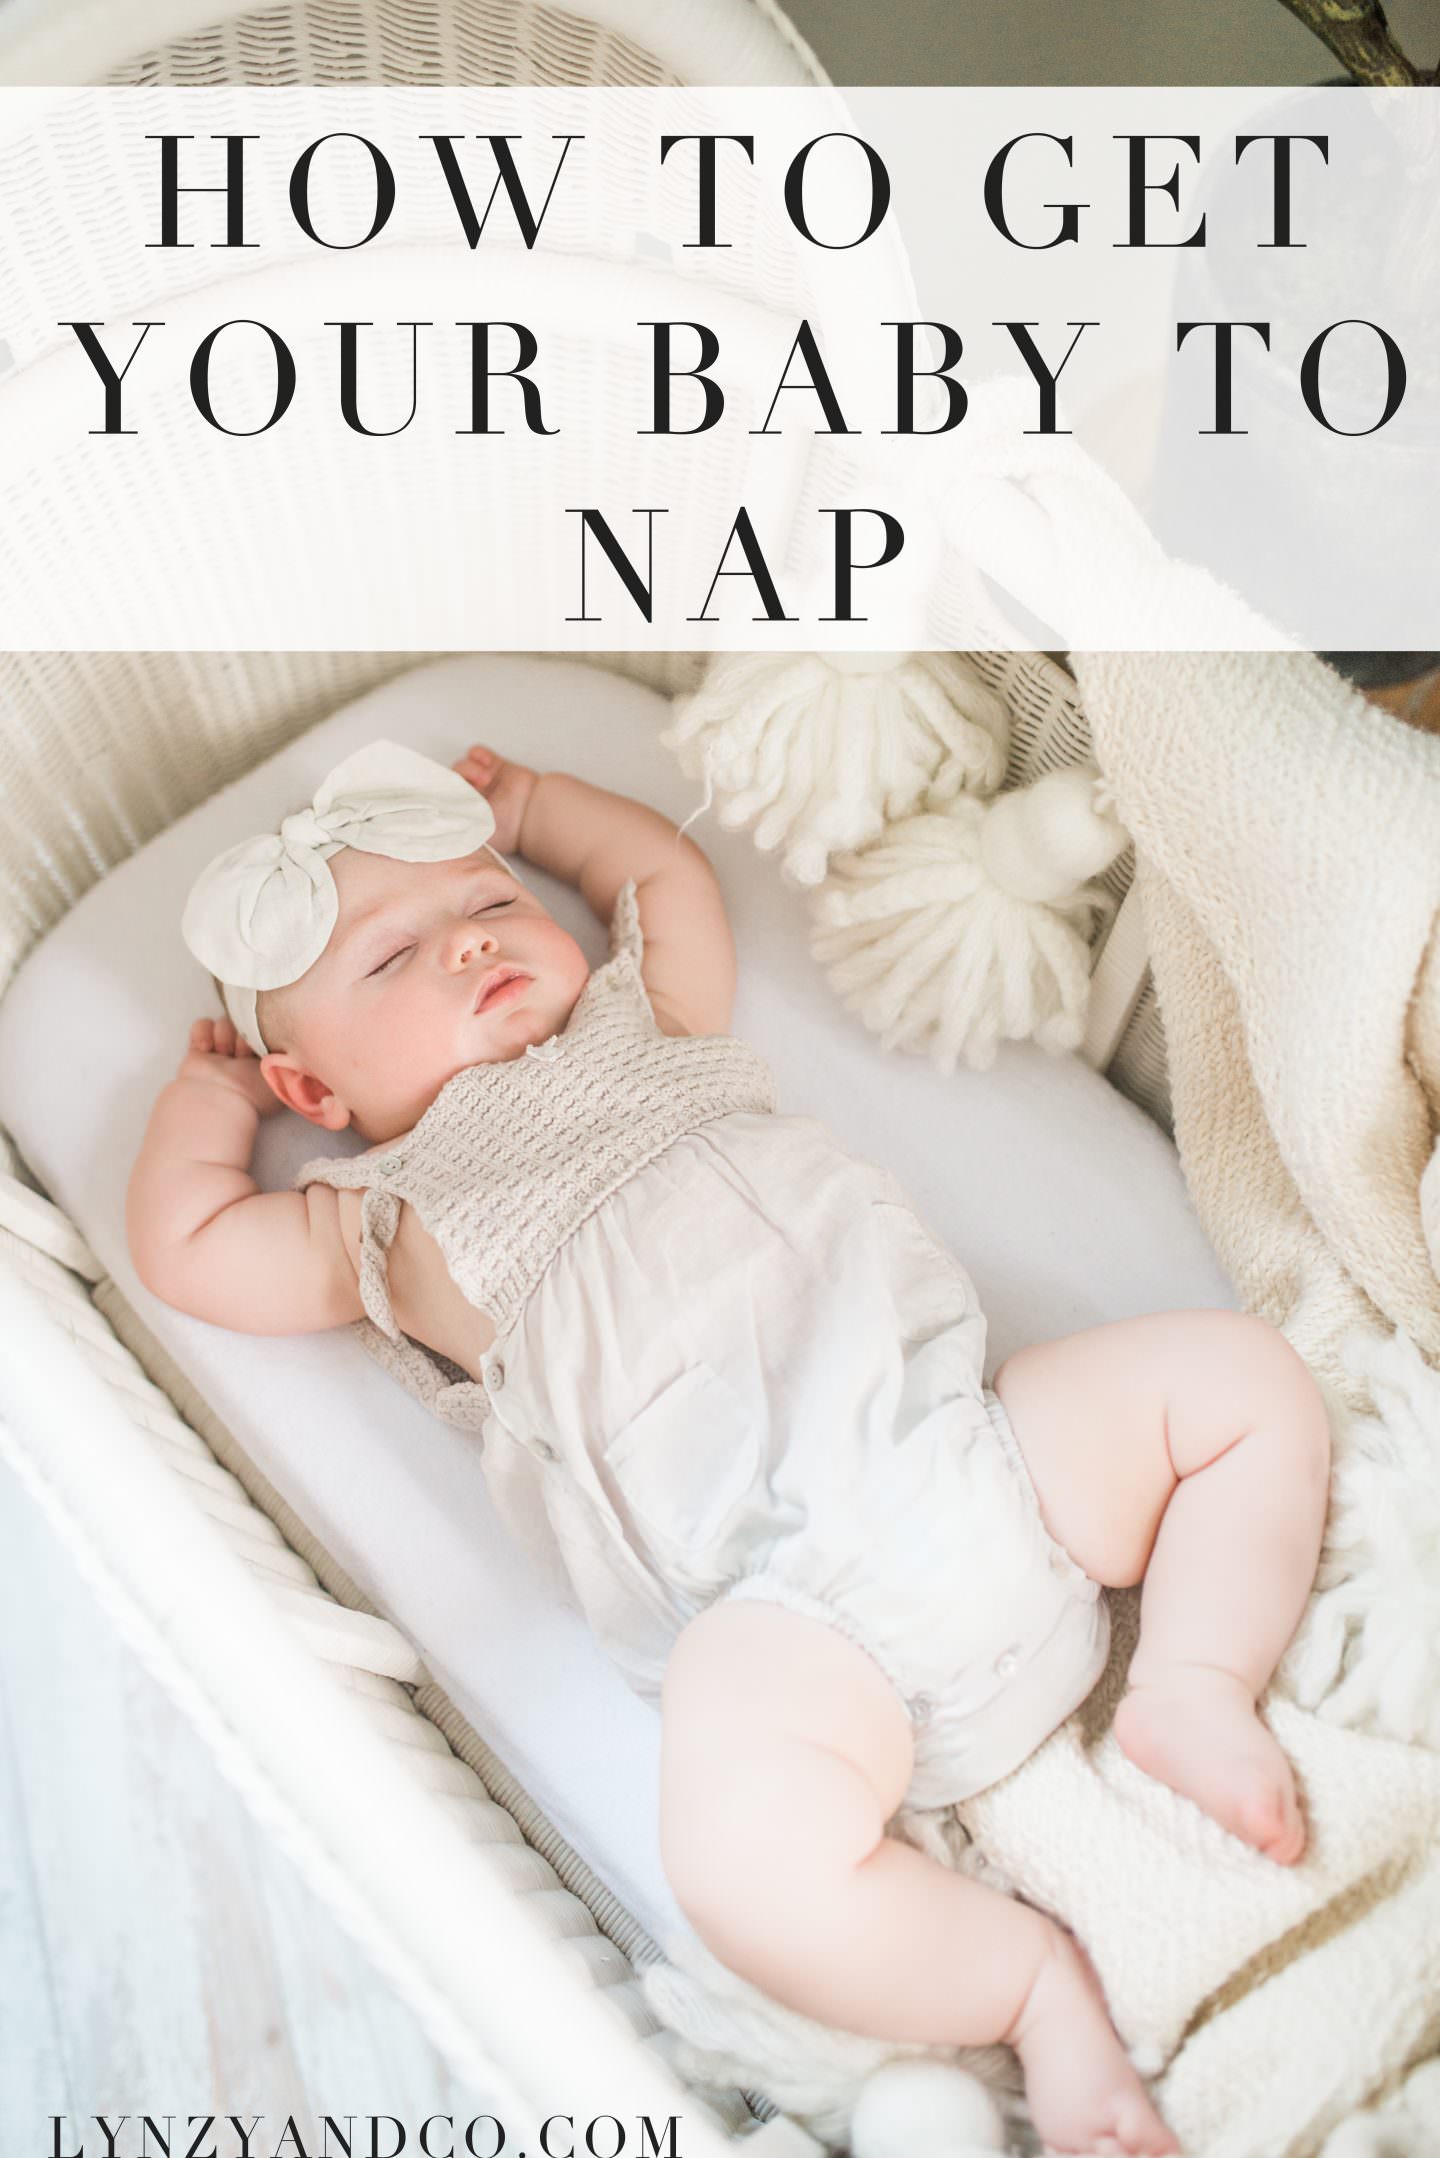 How to get your baby to nap // Nap questions answered by sleep trainer Melissa from the Cradle Coach // Baby sleep simplified!